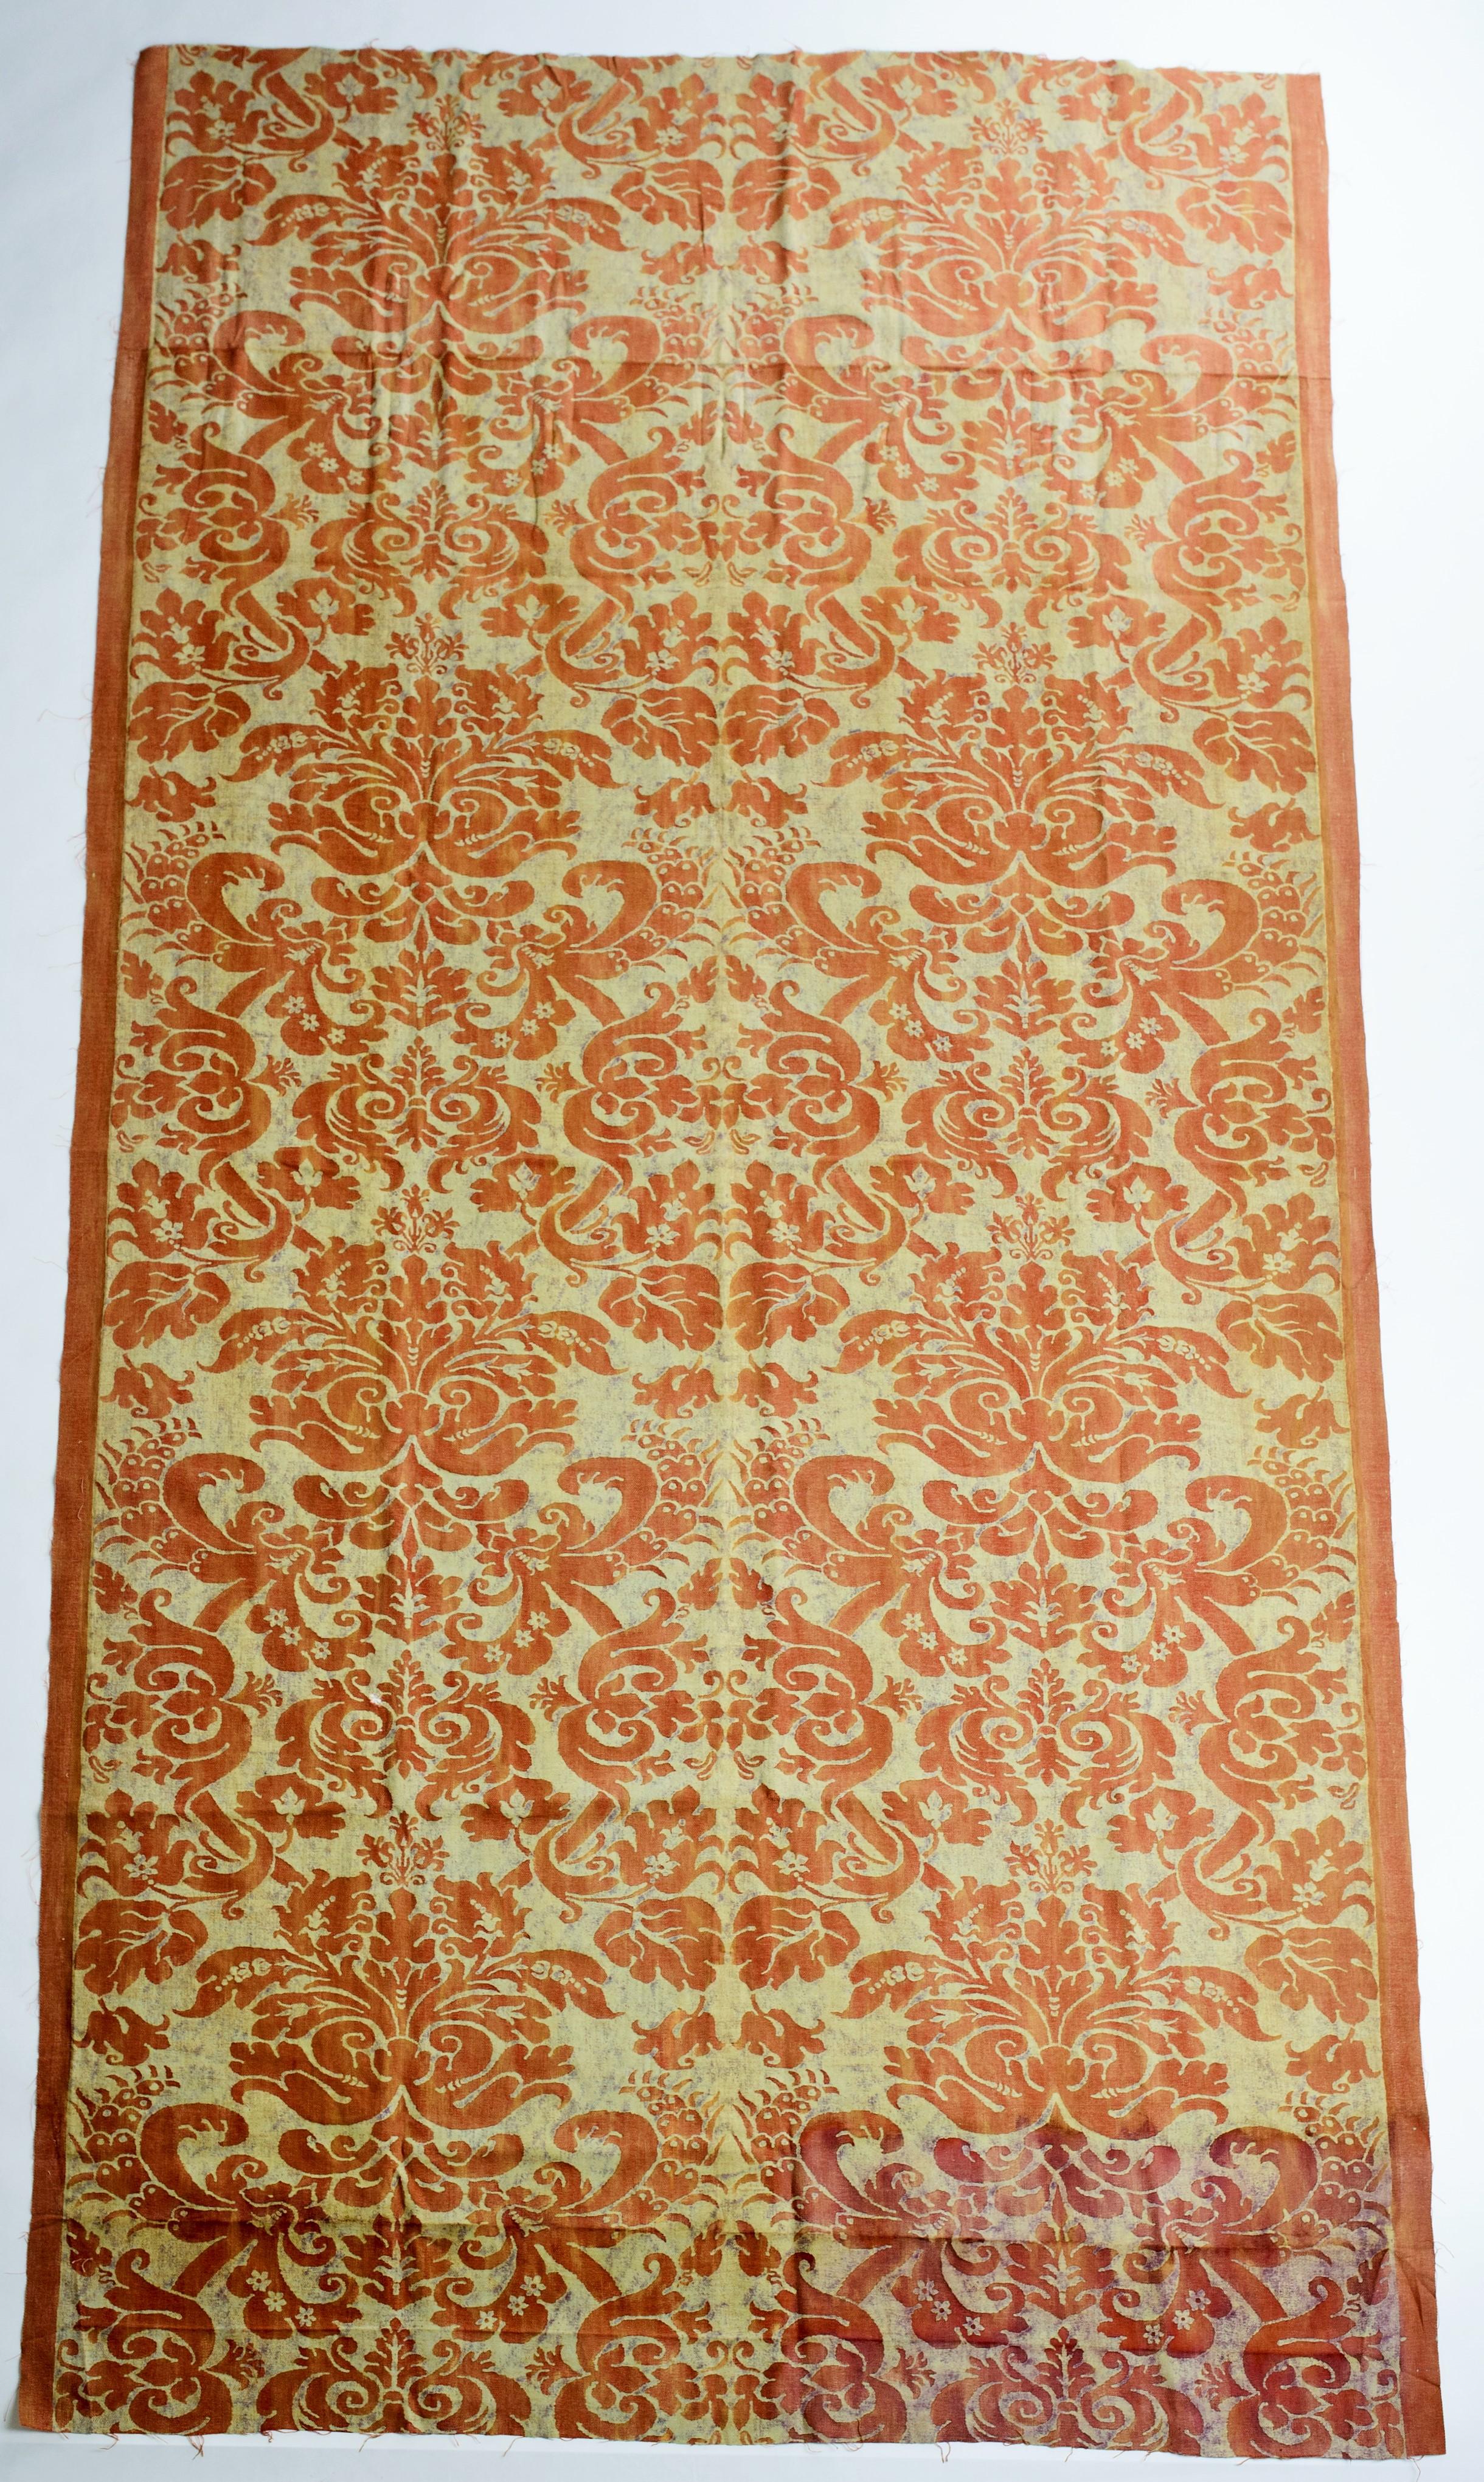 Brown A Mariano Fortuny Printed Cotton Fabric - Italy Circa 1940 For Sale